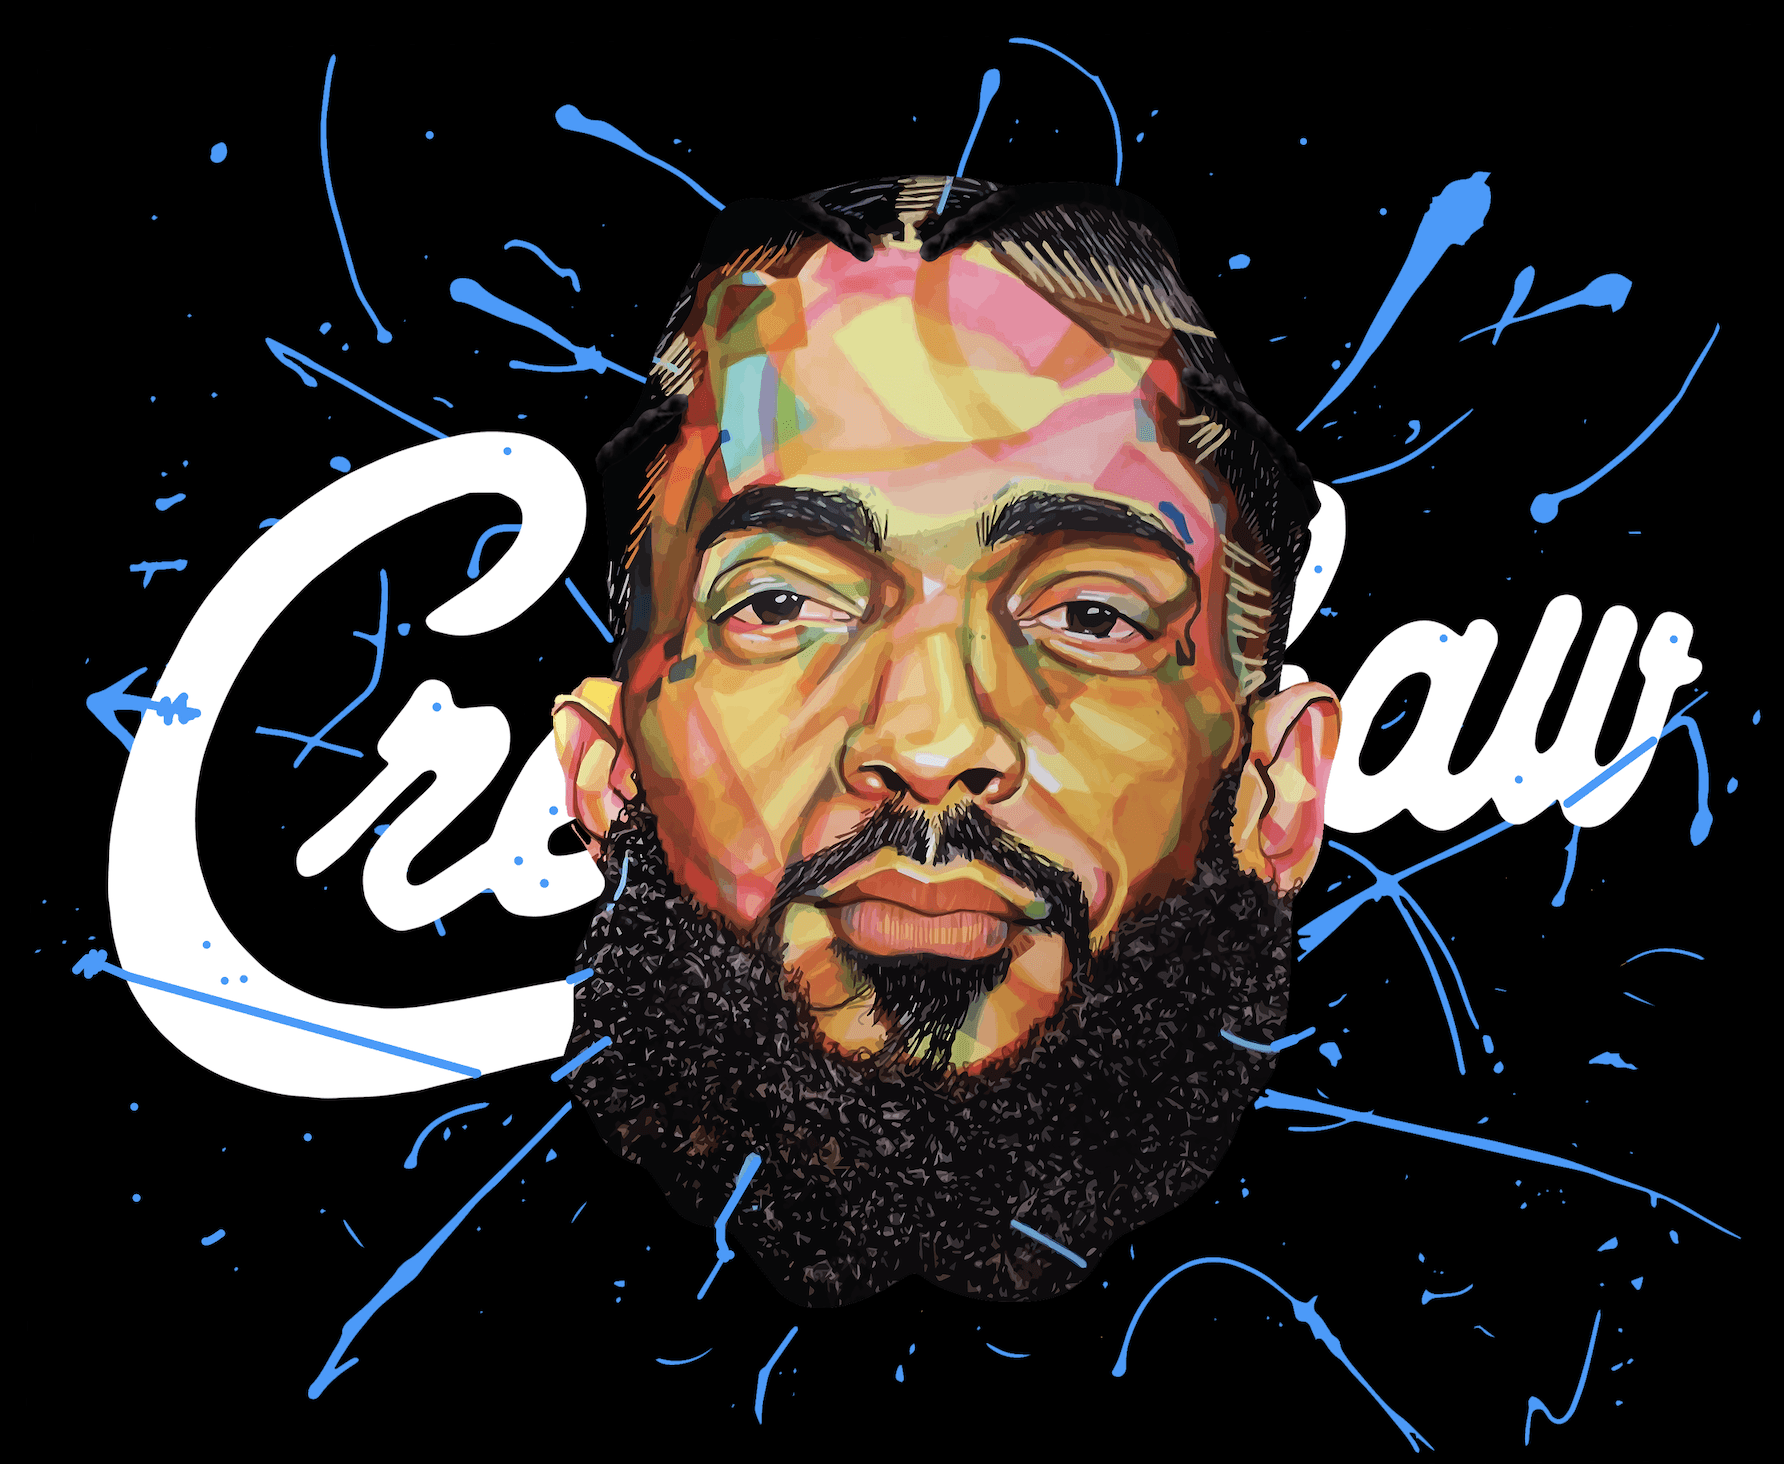 Tribute Art Piece Of the Late Nipsey Hussle. 22x28 on Poster